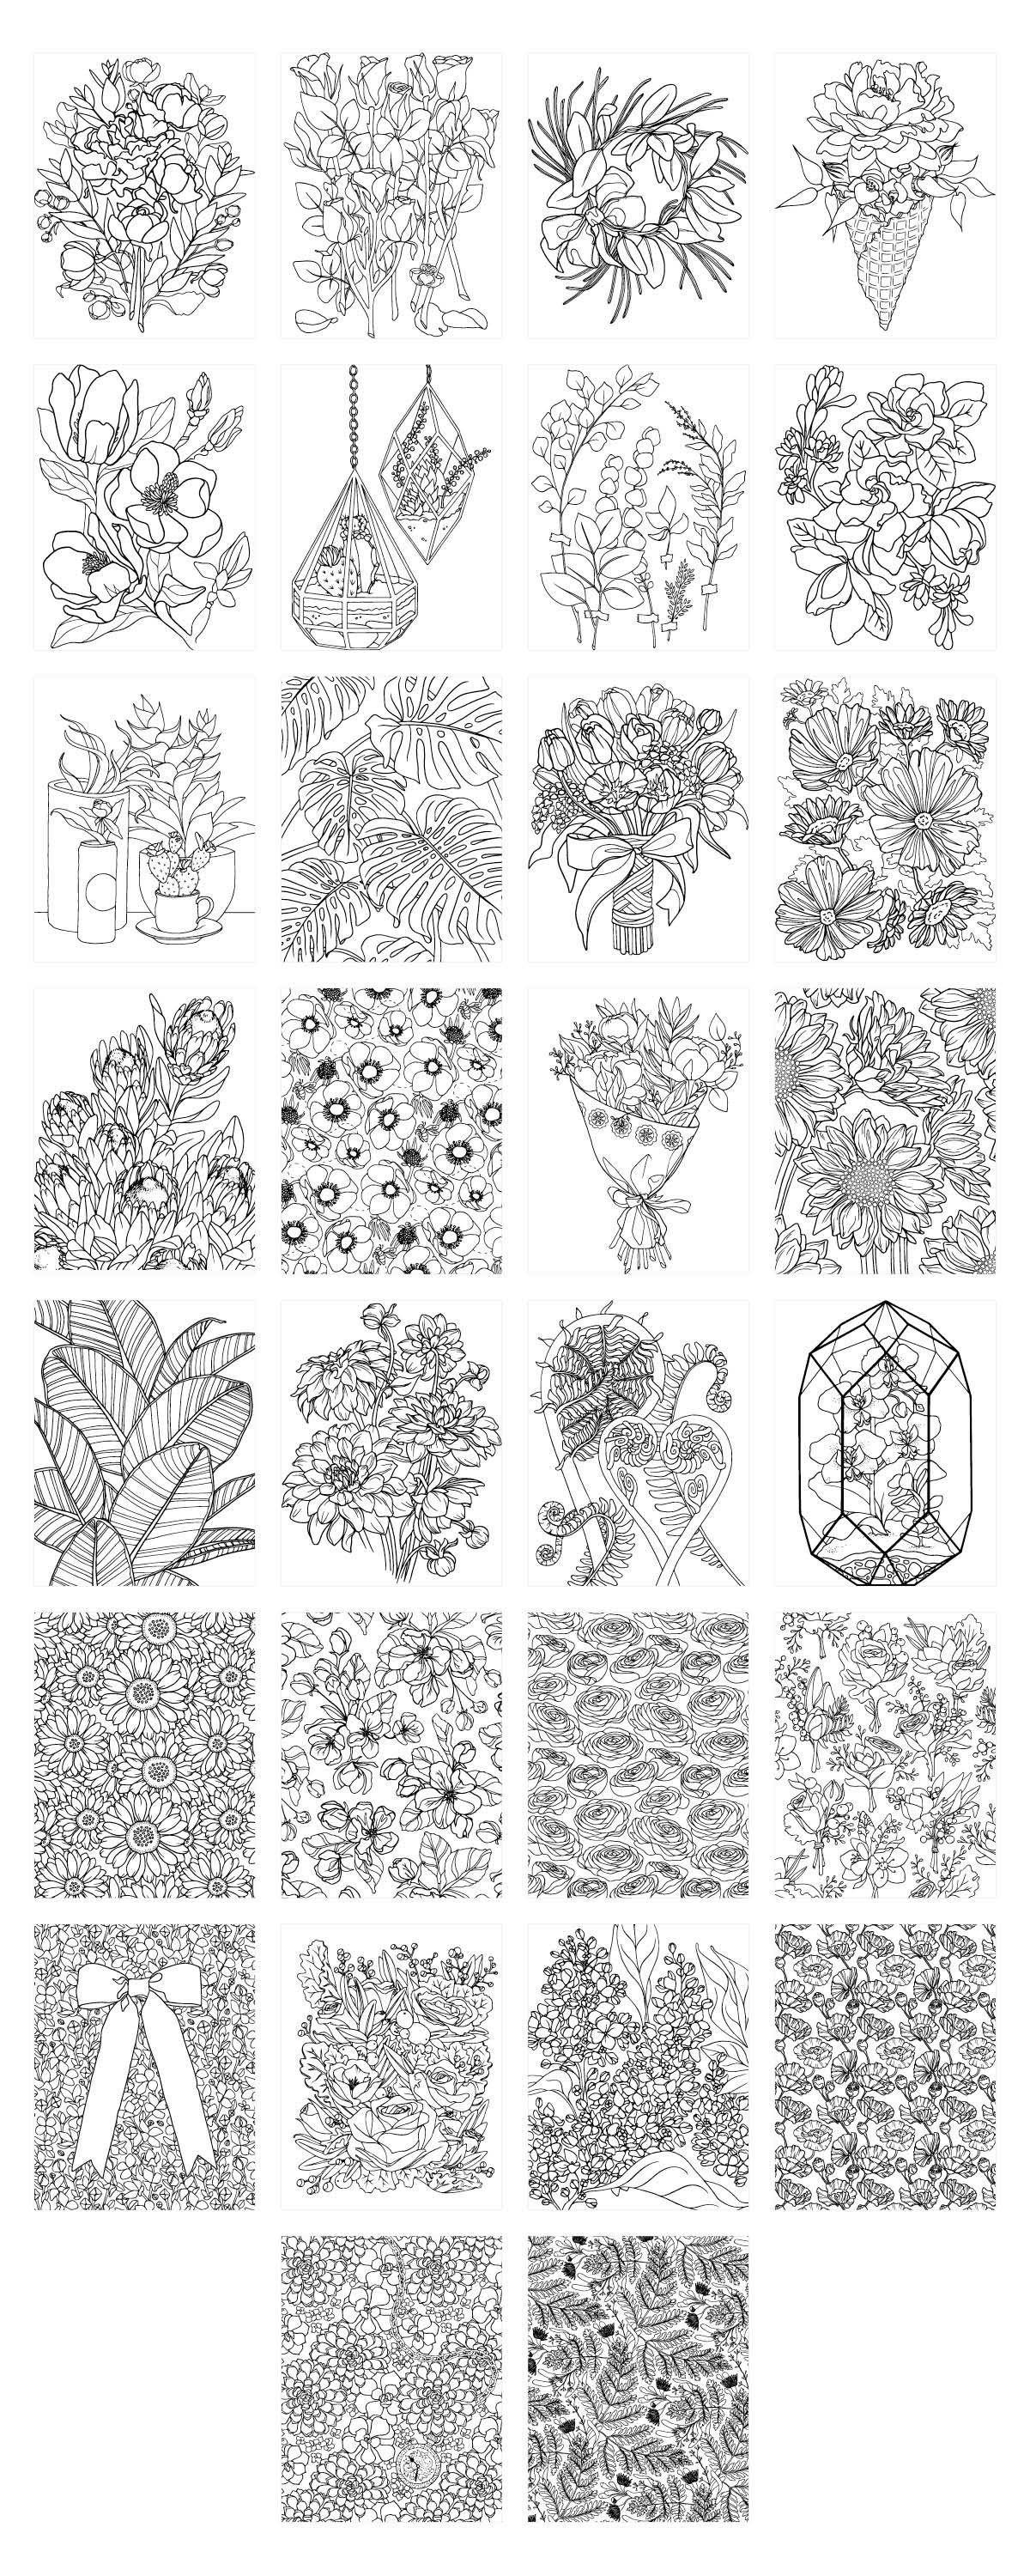 Stress-relieving floral soothing art therapy Flowers dahlias coloring adult coloring daisies repeating patterns